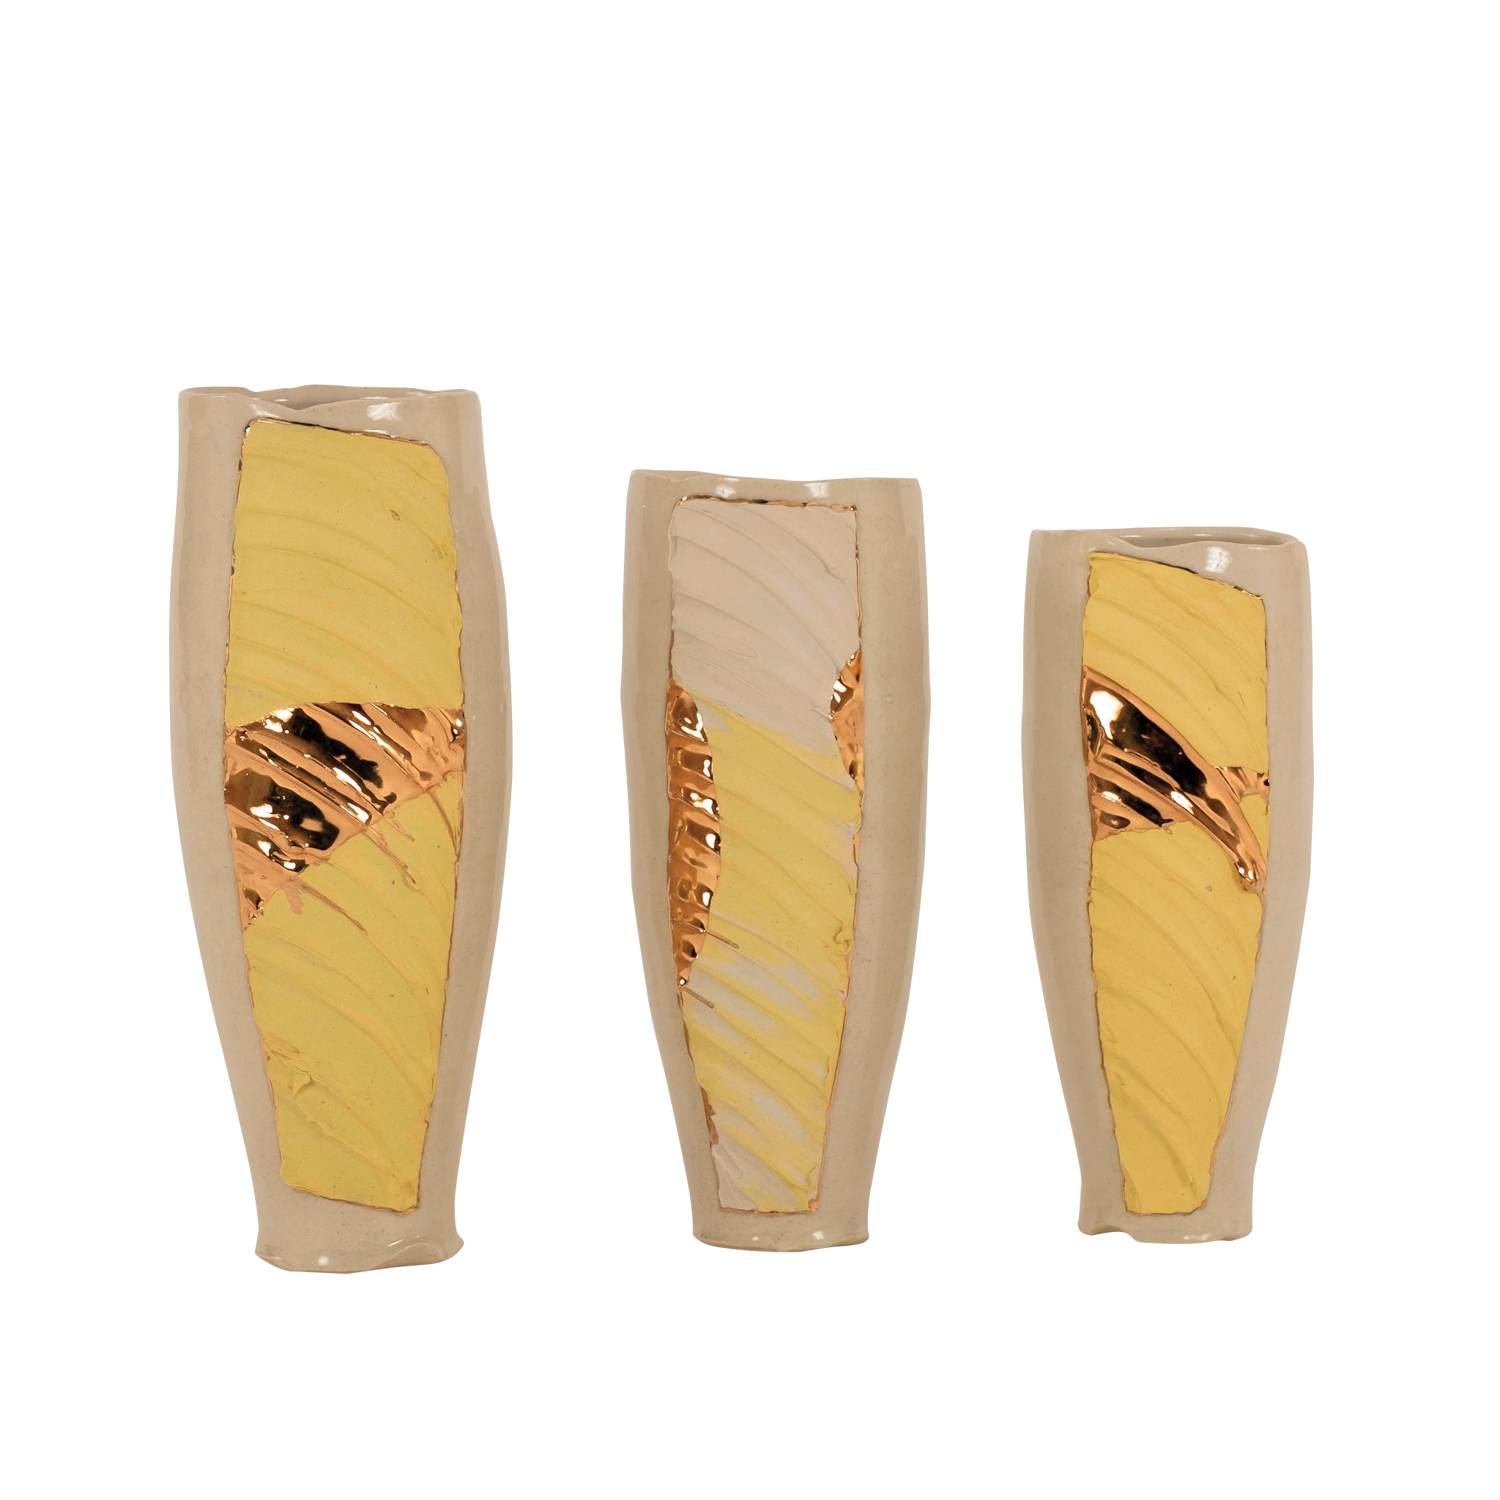 3 yellow-and-beige vases with cooper accents lined up from left to right, tallest to smallest